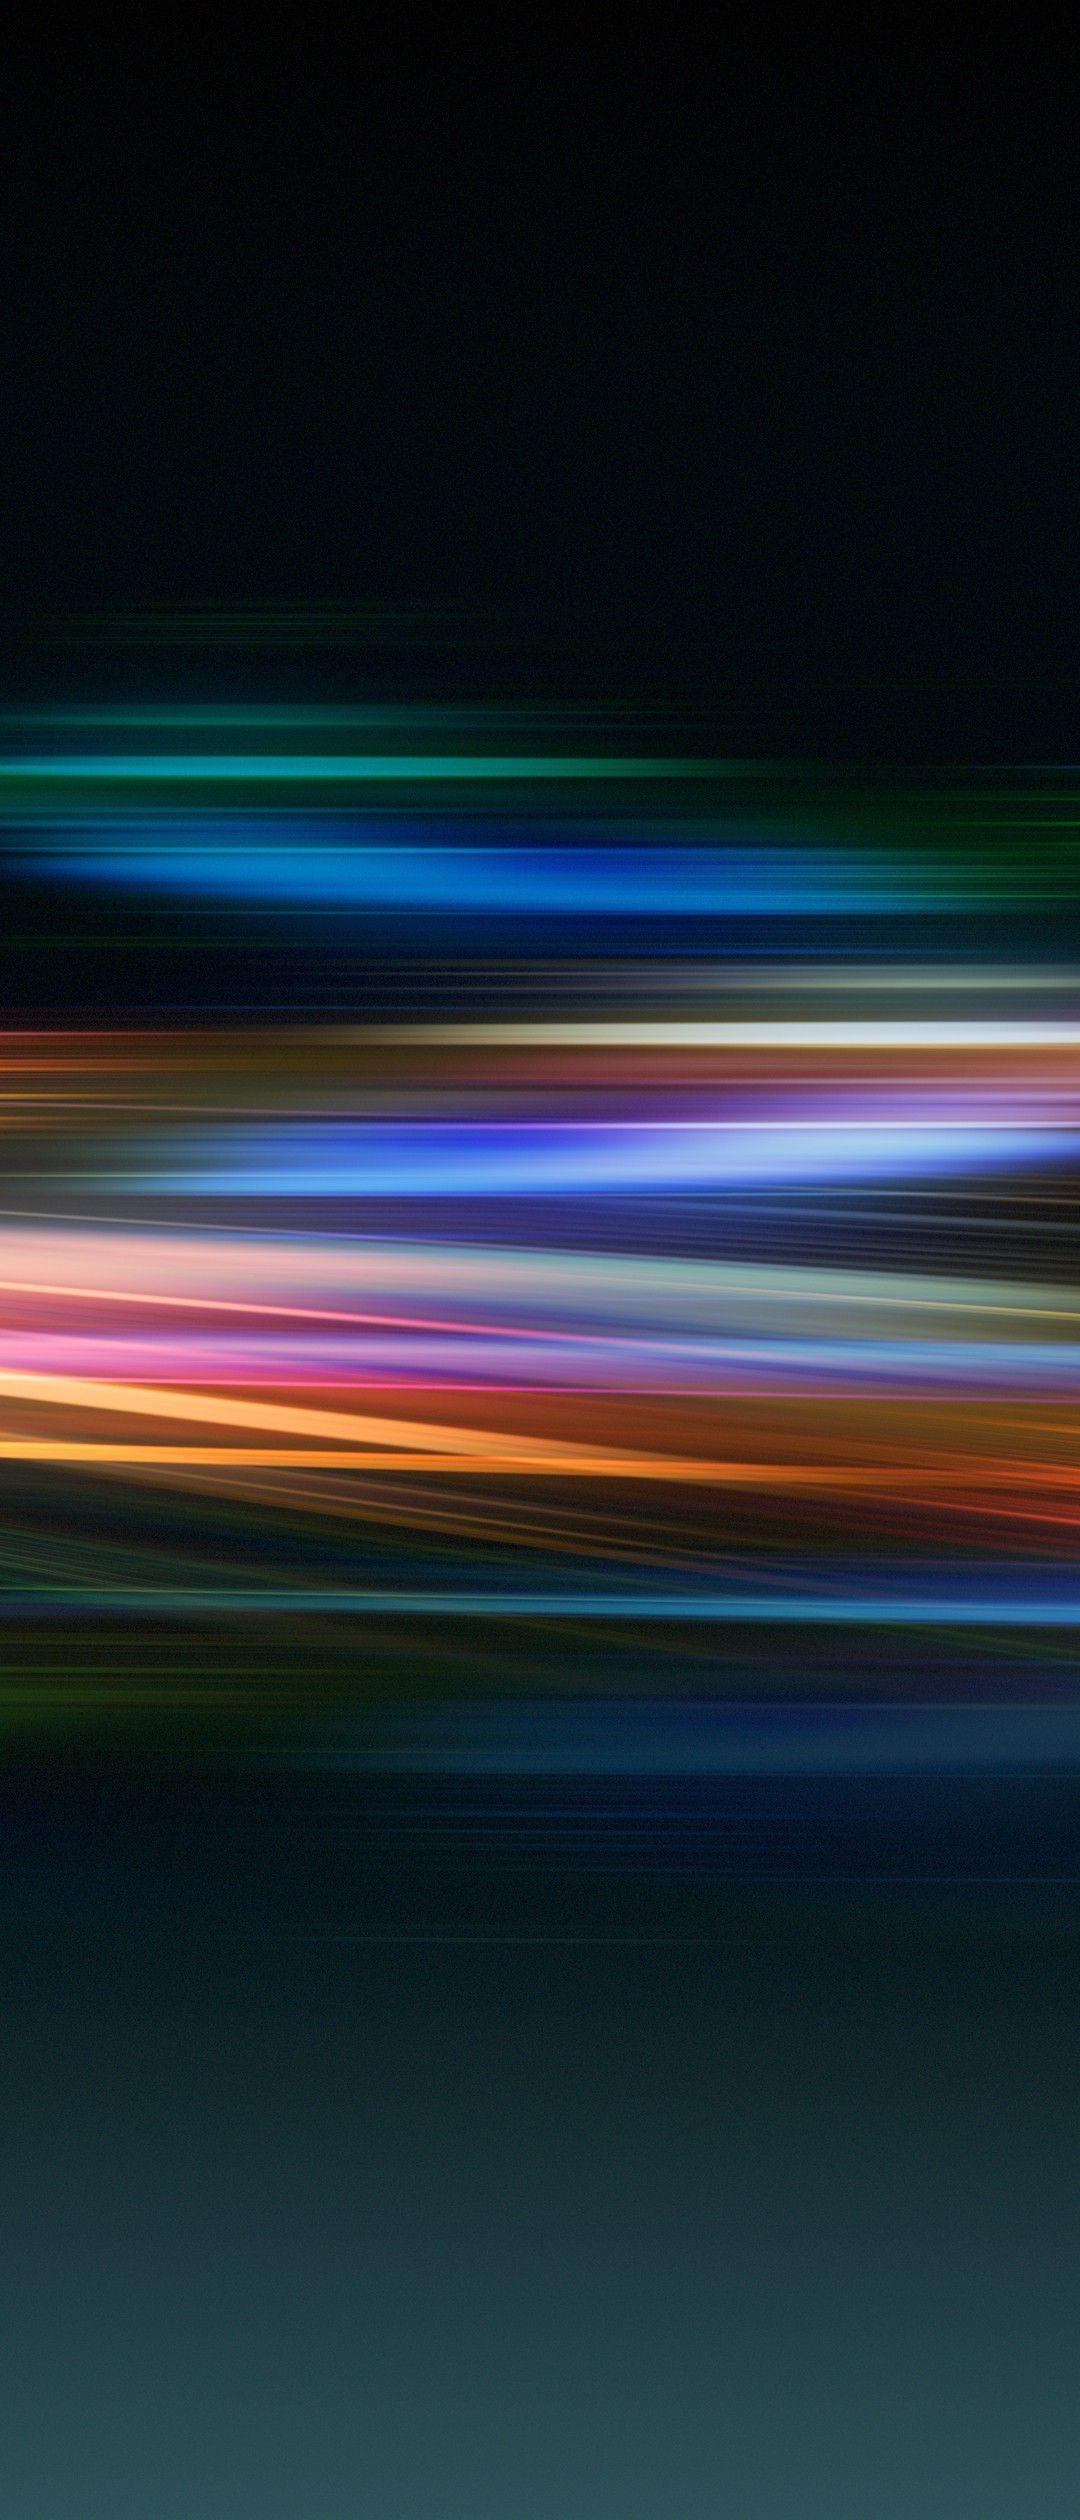 Sony Xperia 1 Wallpapers Top Free Sony Xperia 1 Backgrounds Wallpaperaccess